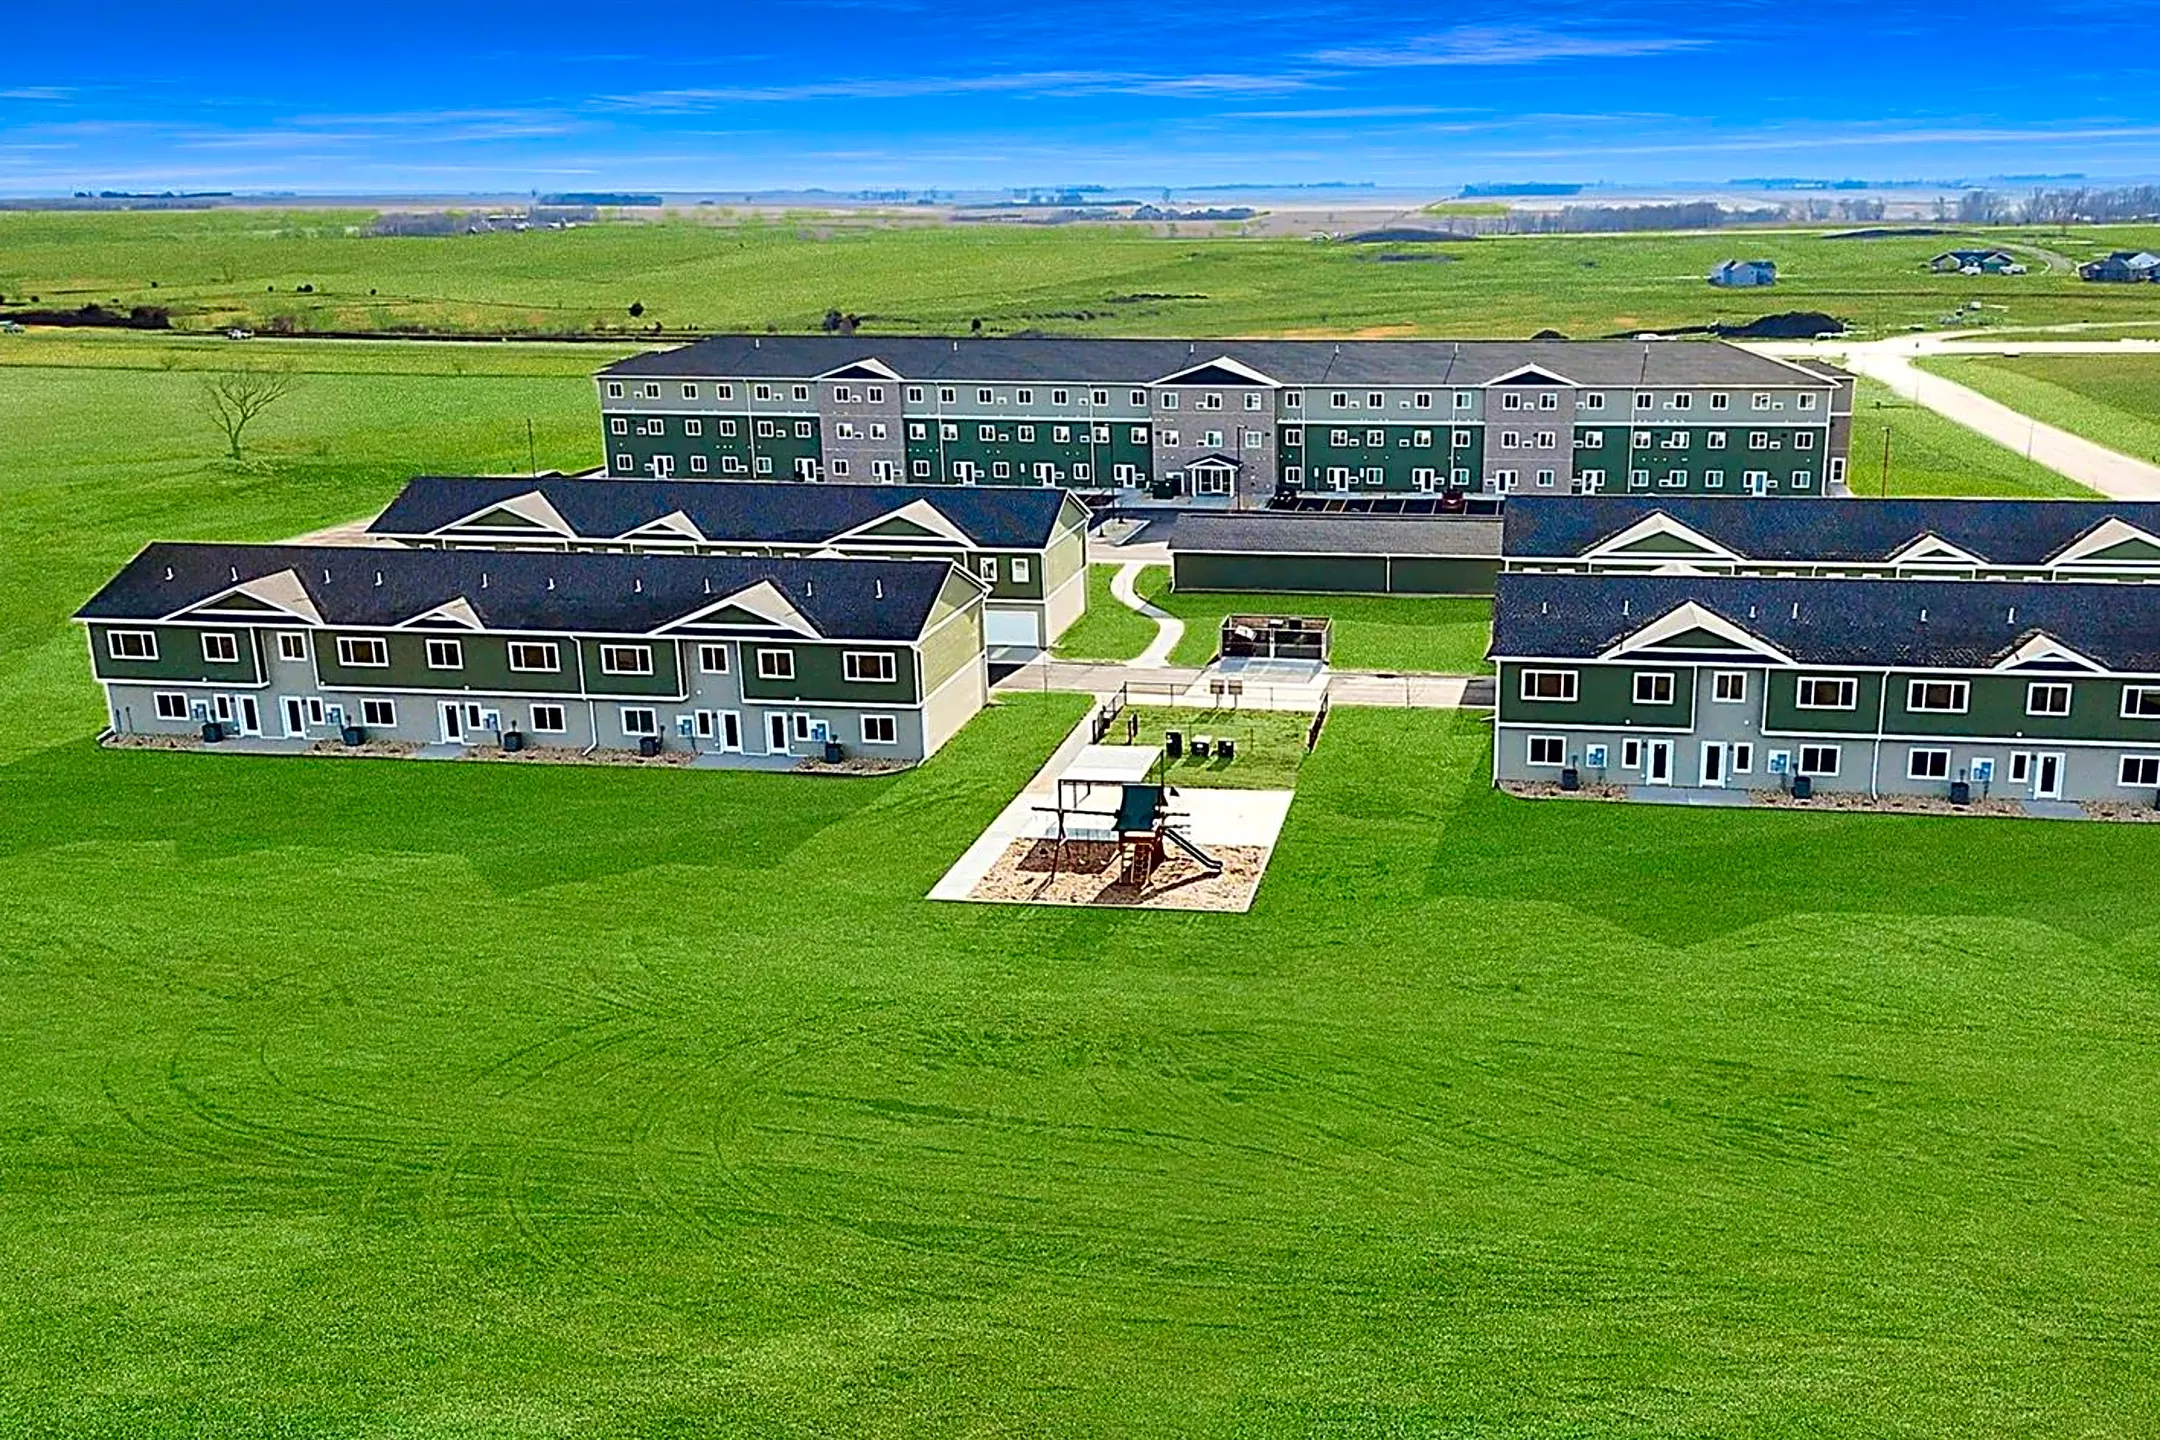 Building - Maple Pass Apartments & Townhomes - Hartford, SD